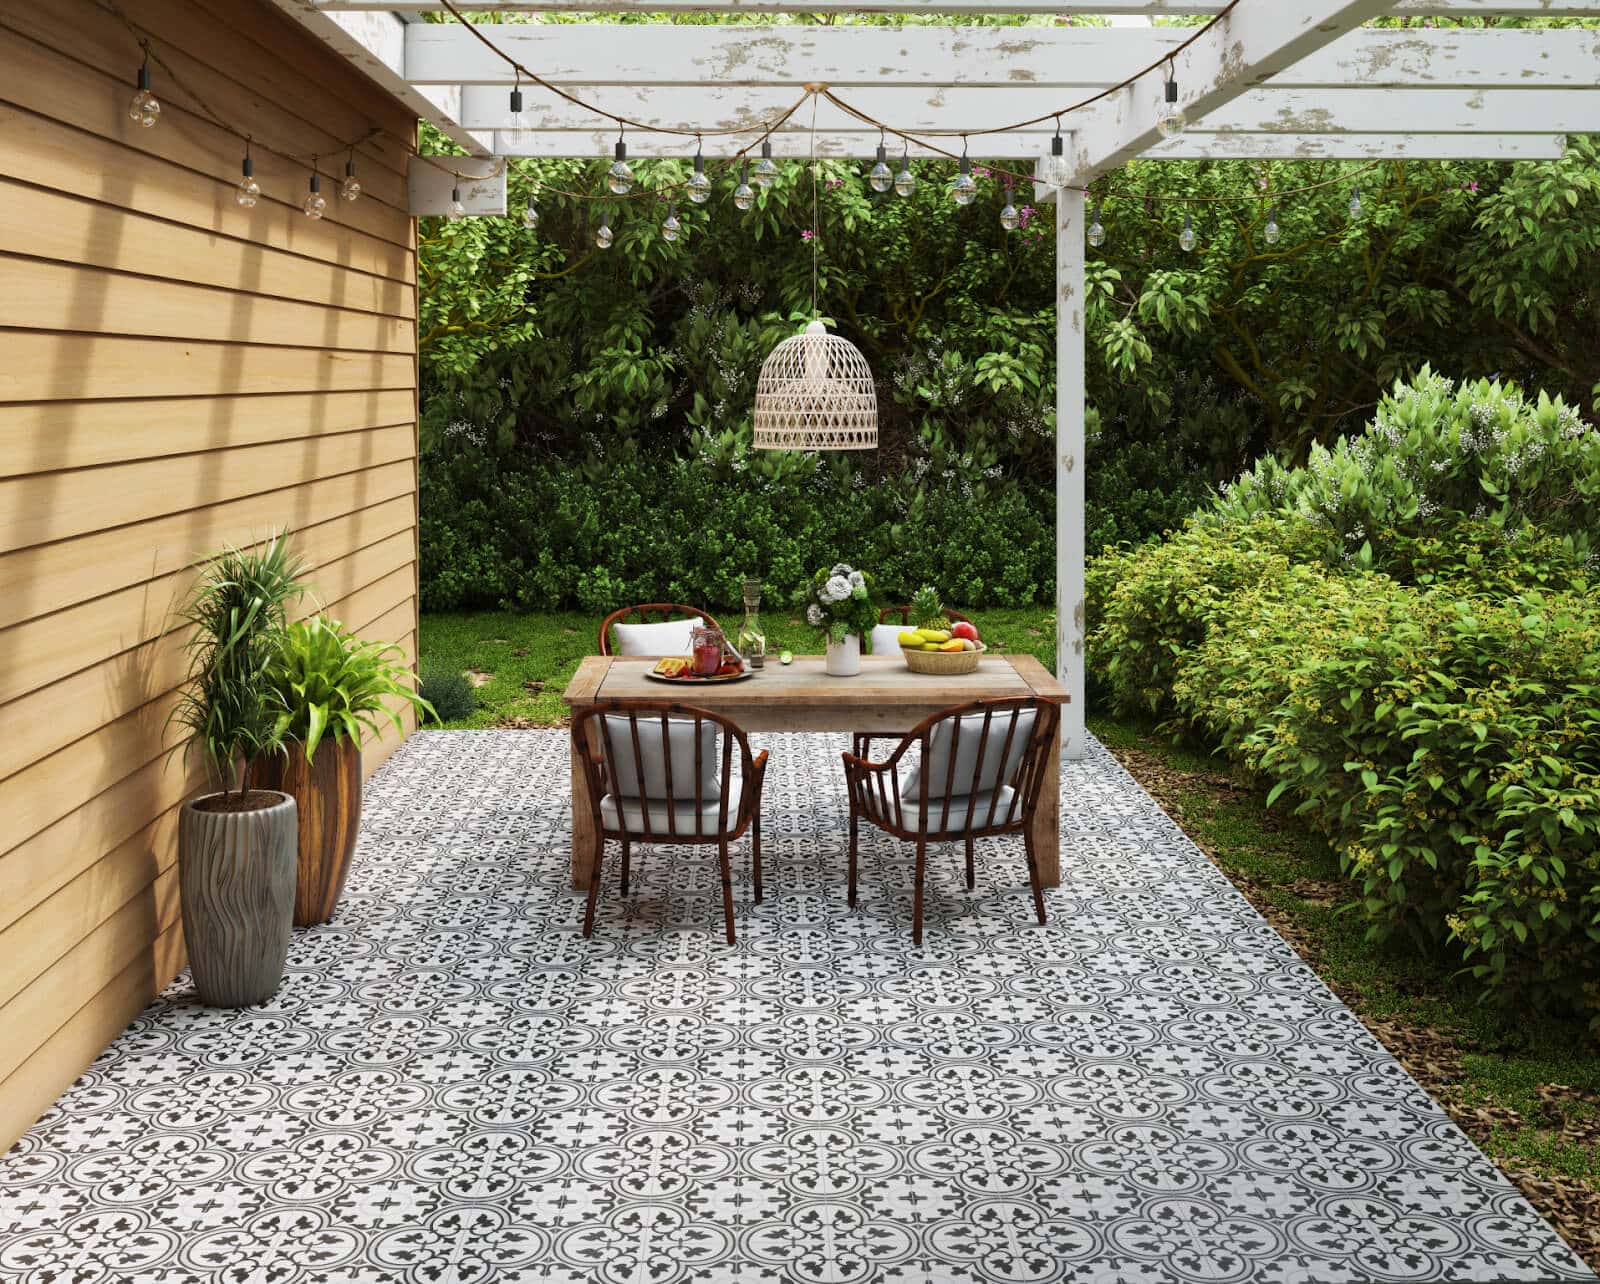 Patterned tile flooring in an outdoor dining area